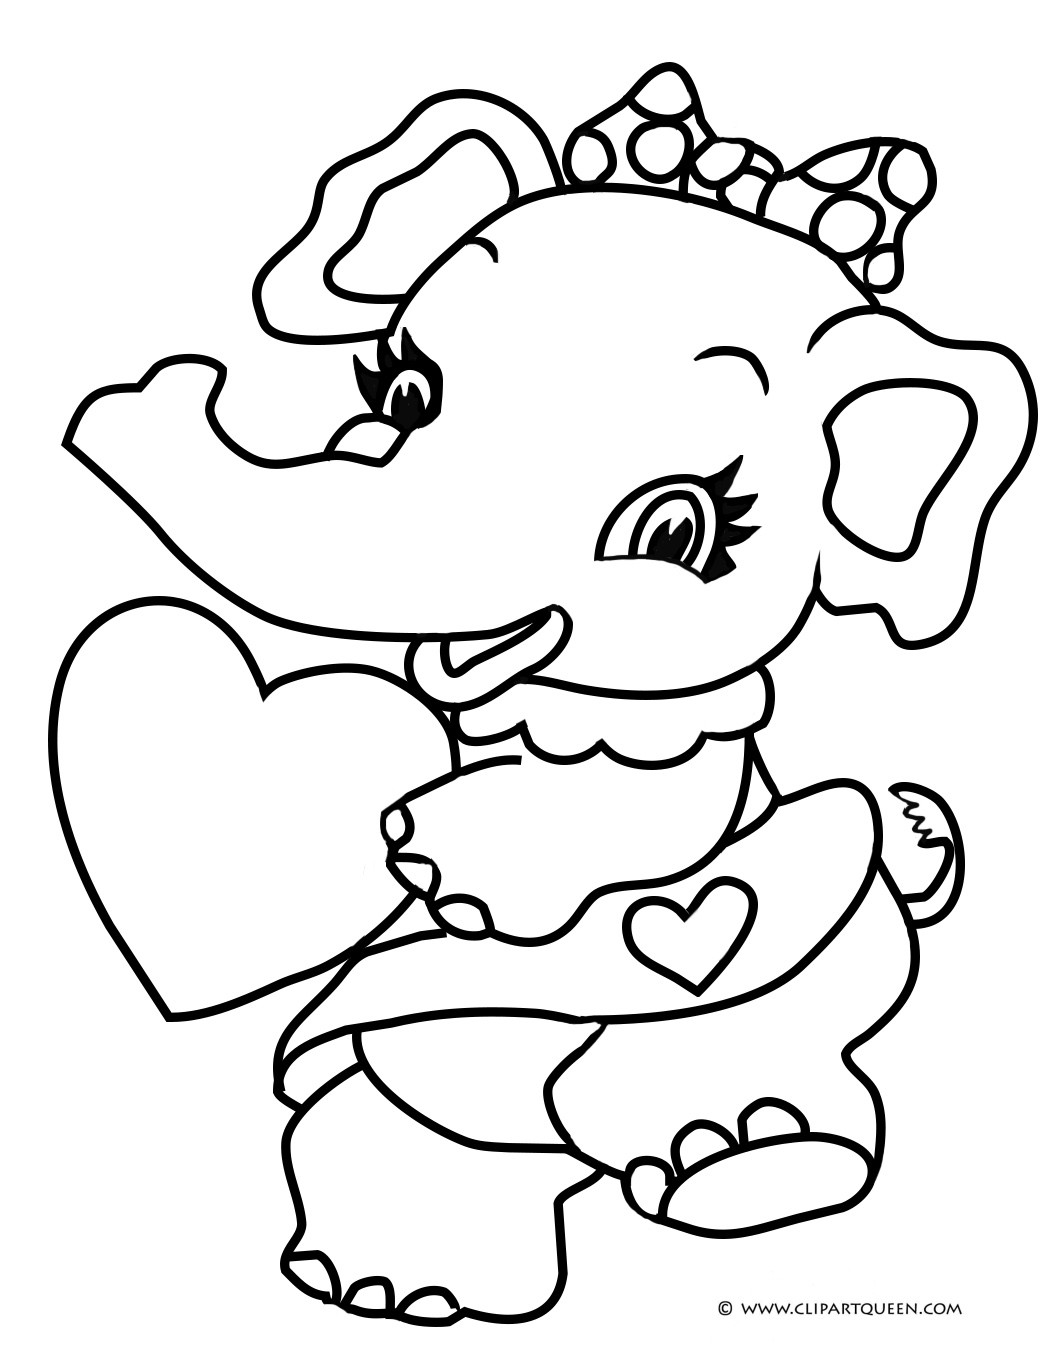 Valentines Day Coloring Pages For Toddlers
 15 Valentine s Day coloring pages